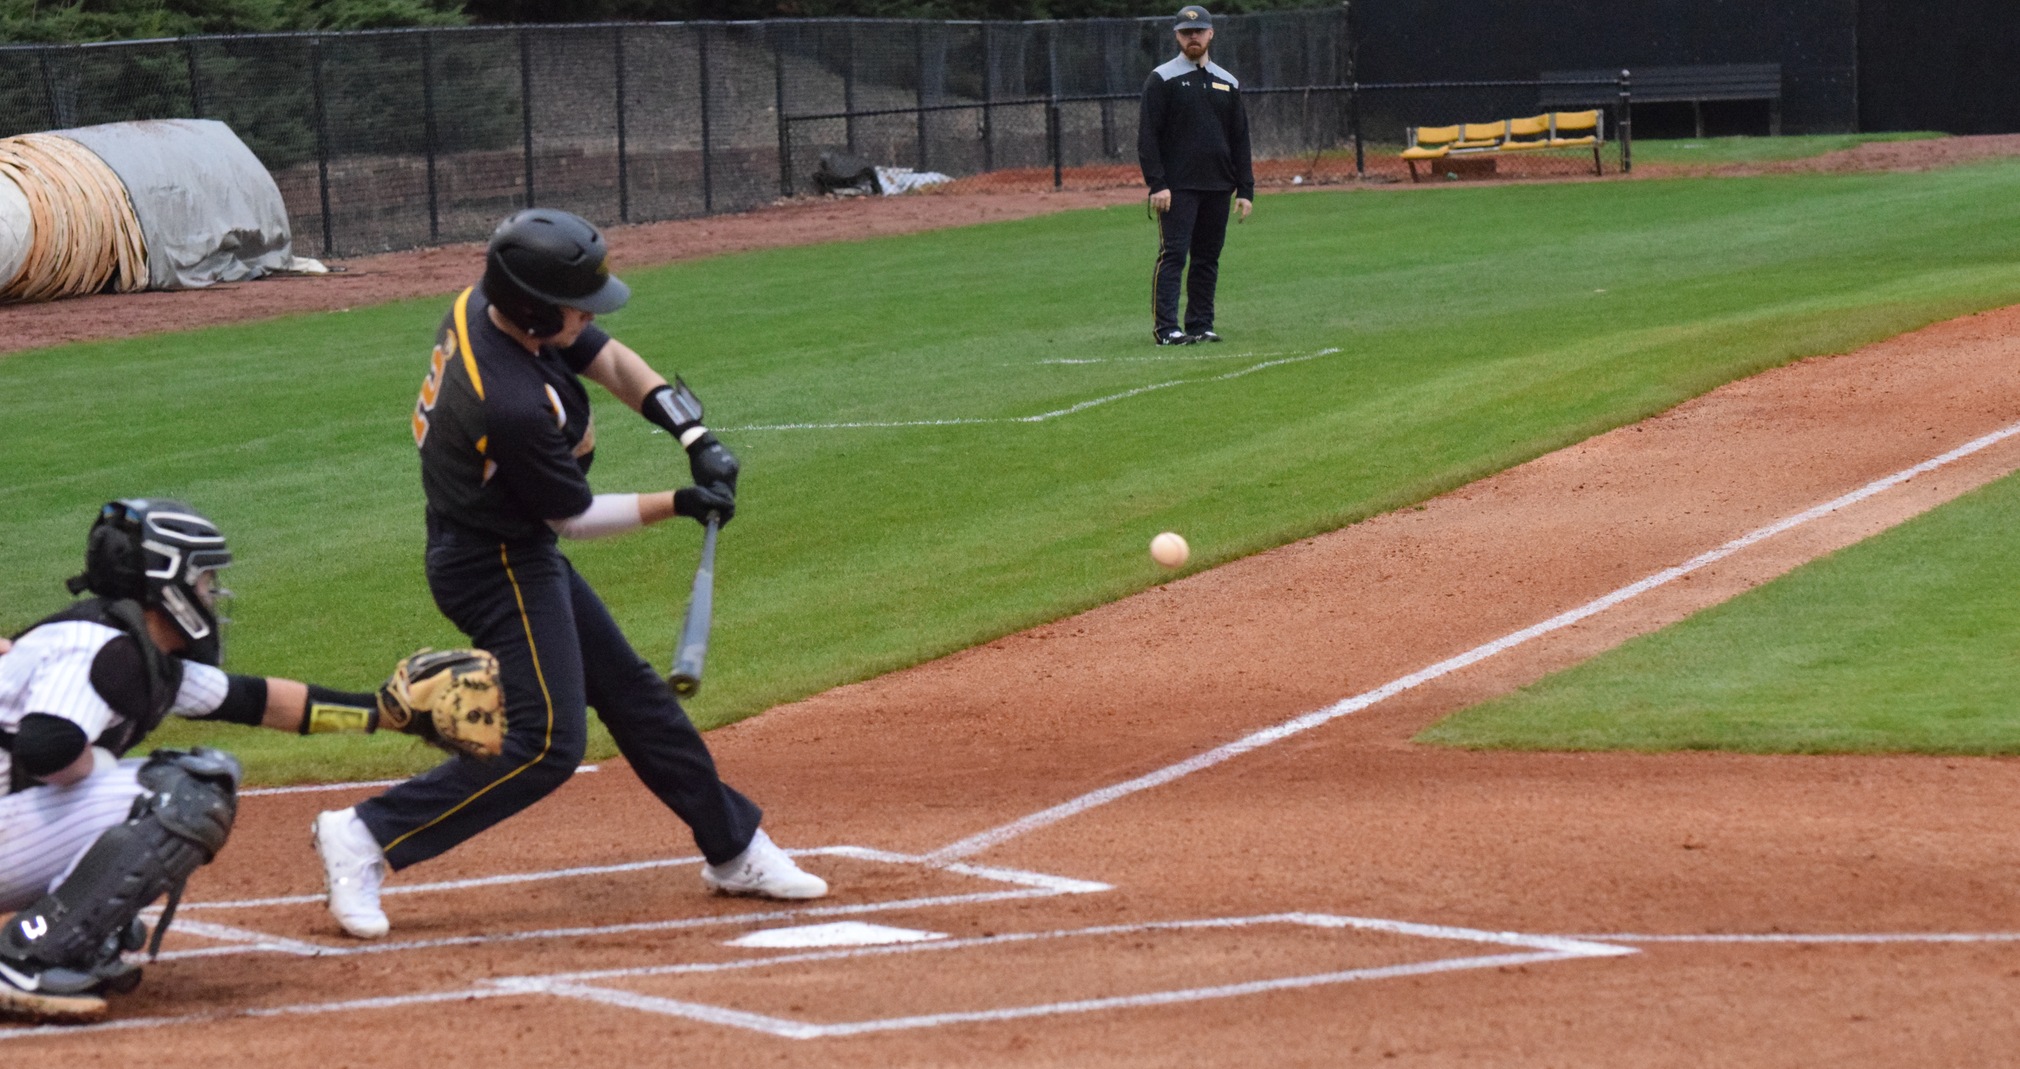 Dylan Ott had three hits and stole three bases against the Panthers.